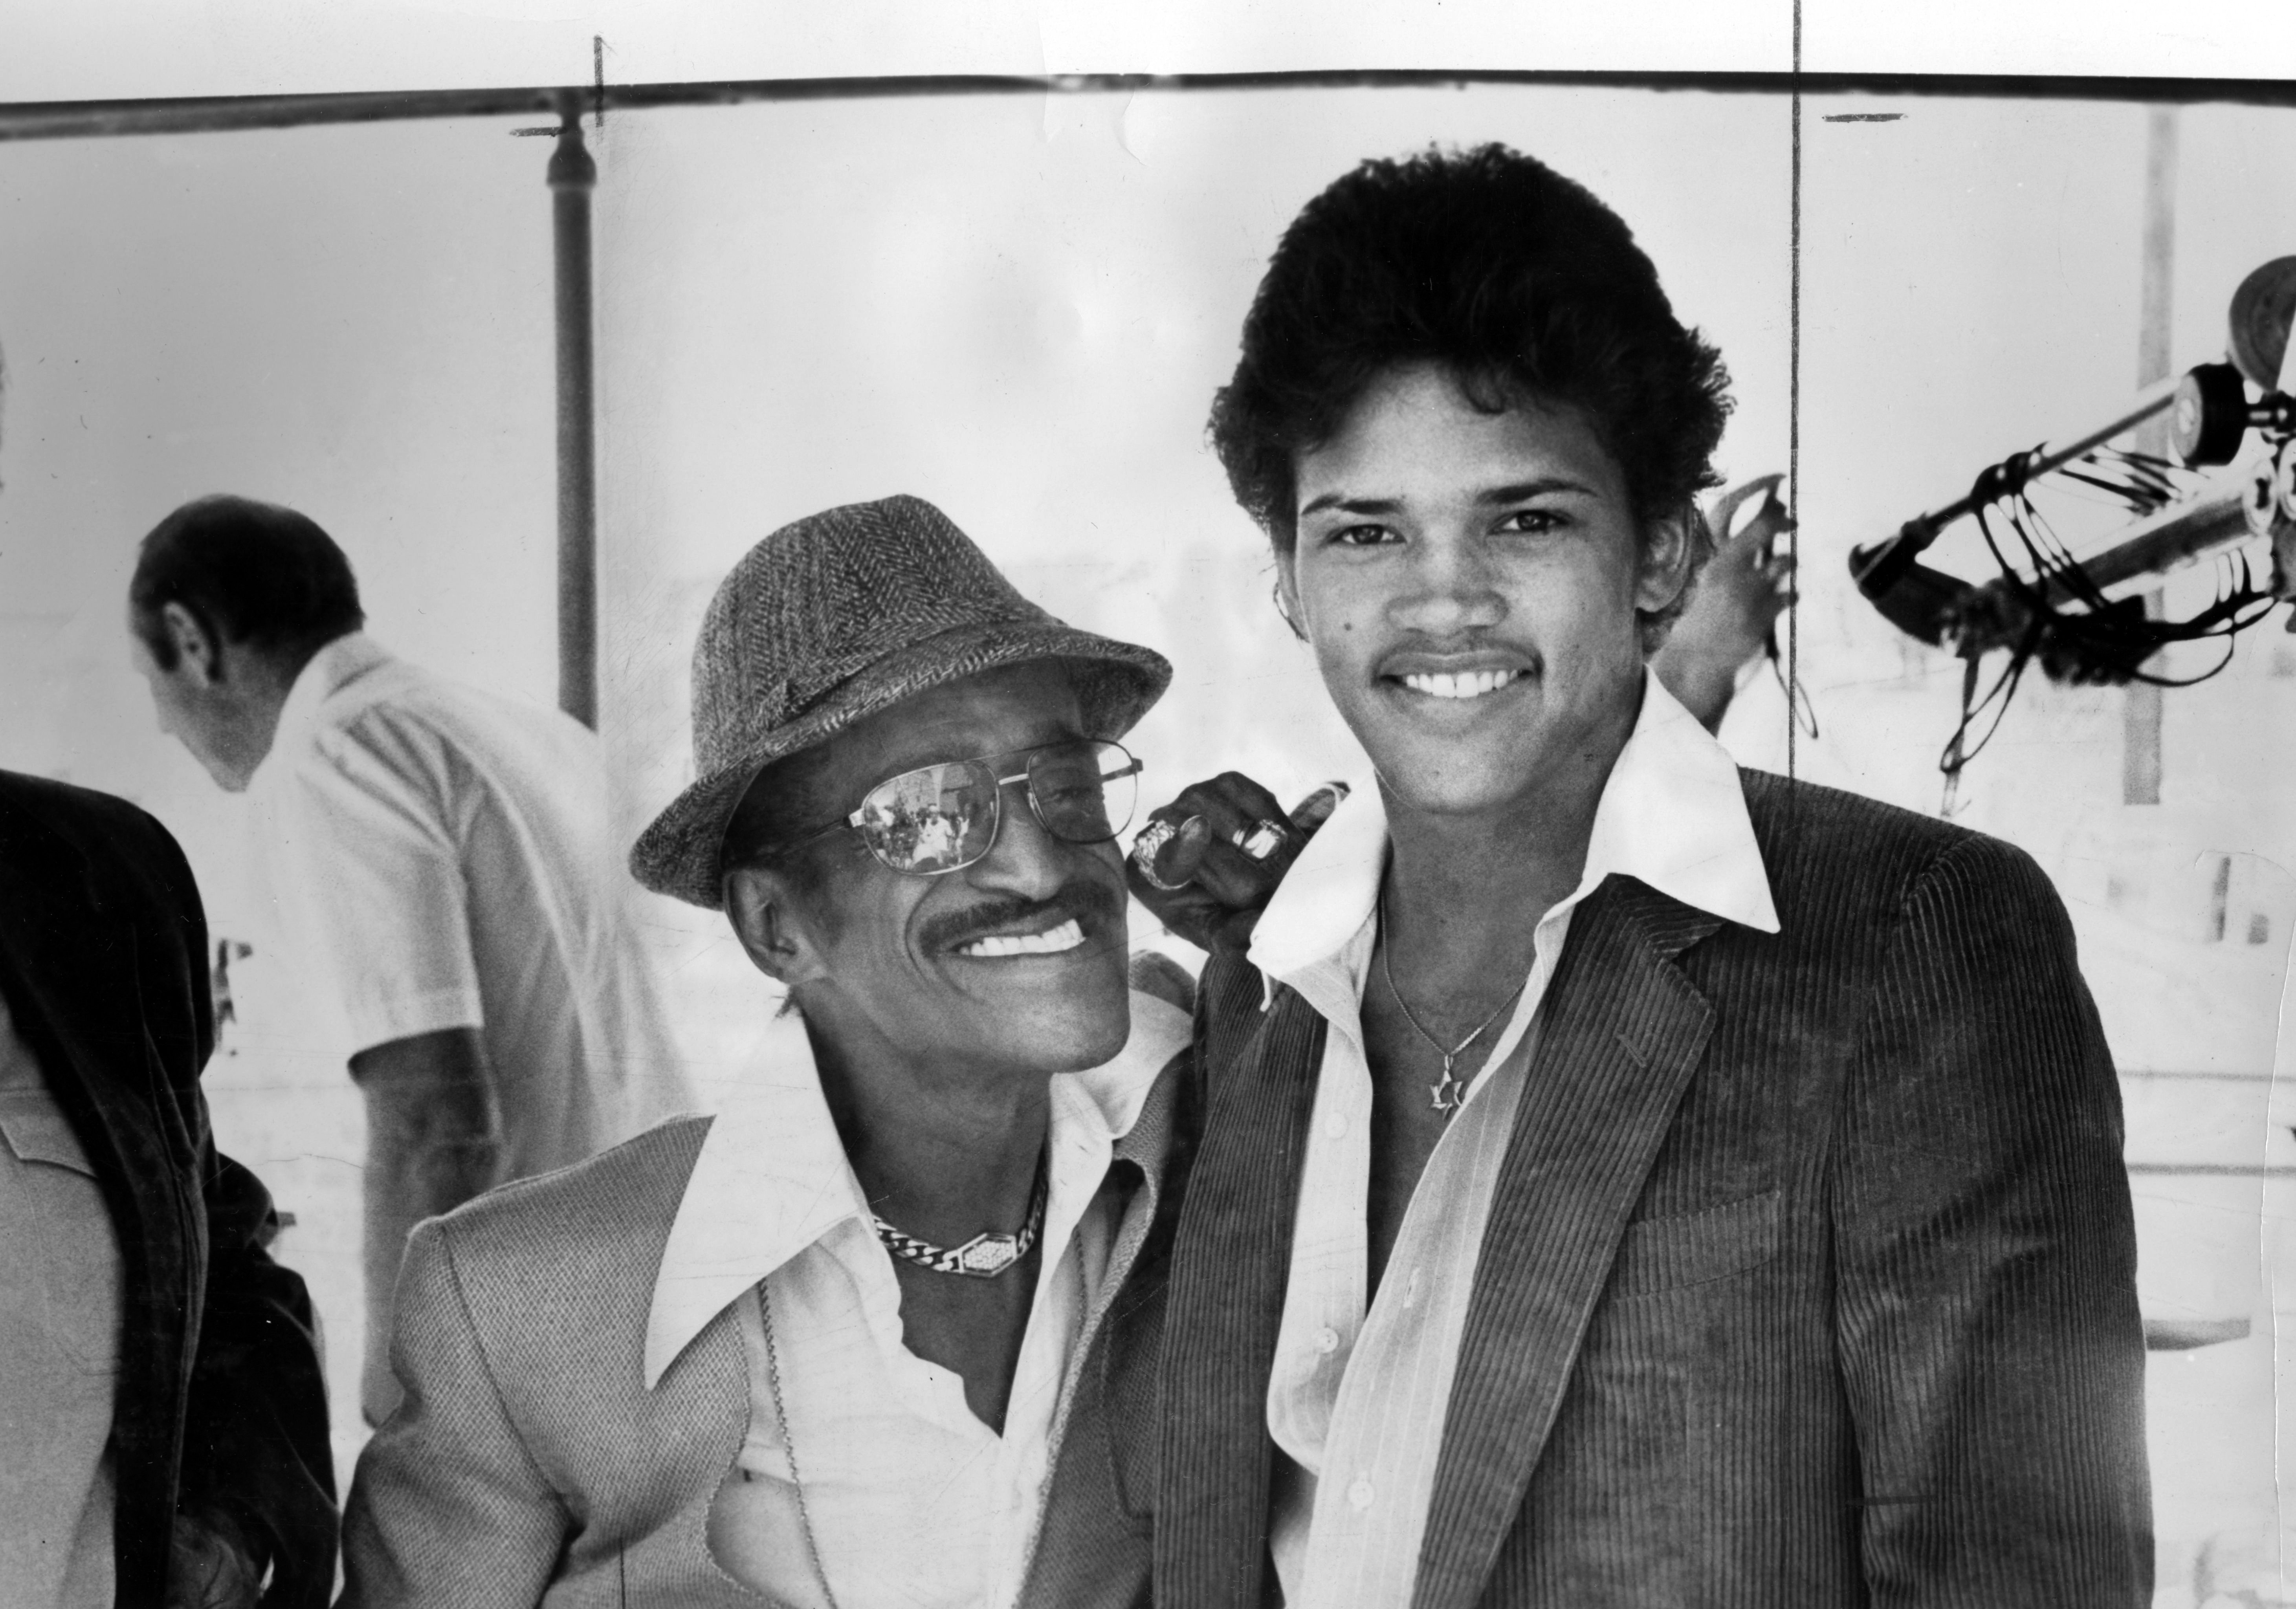 African American entertainer Sammy Davis Junior stands with his son on a movie set, 1970. | Source: Getty Images